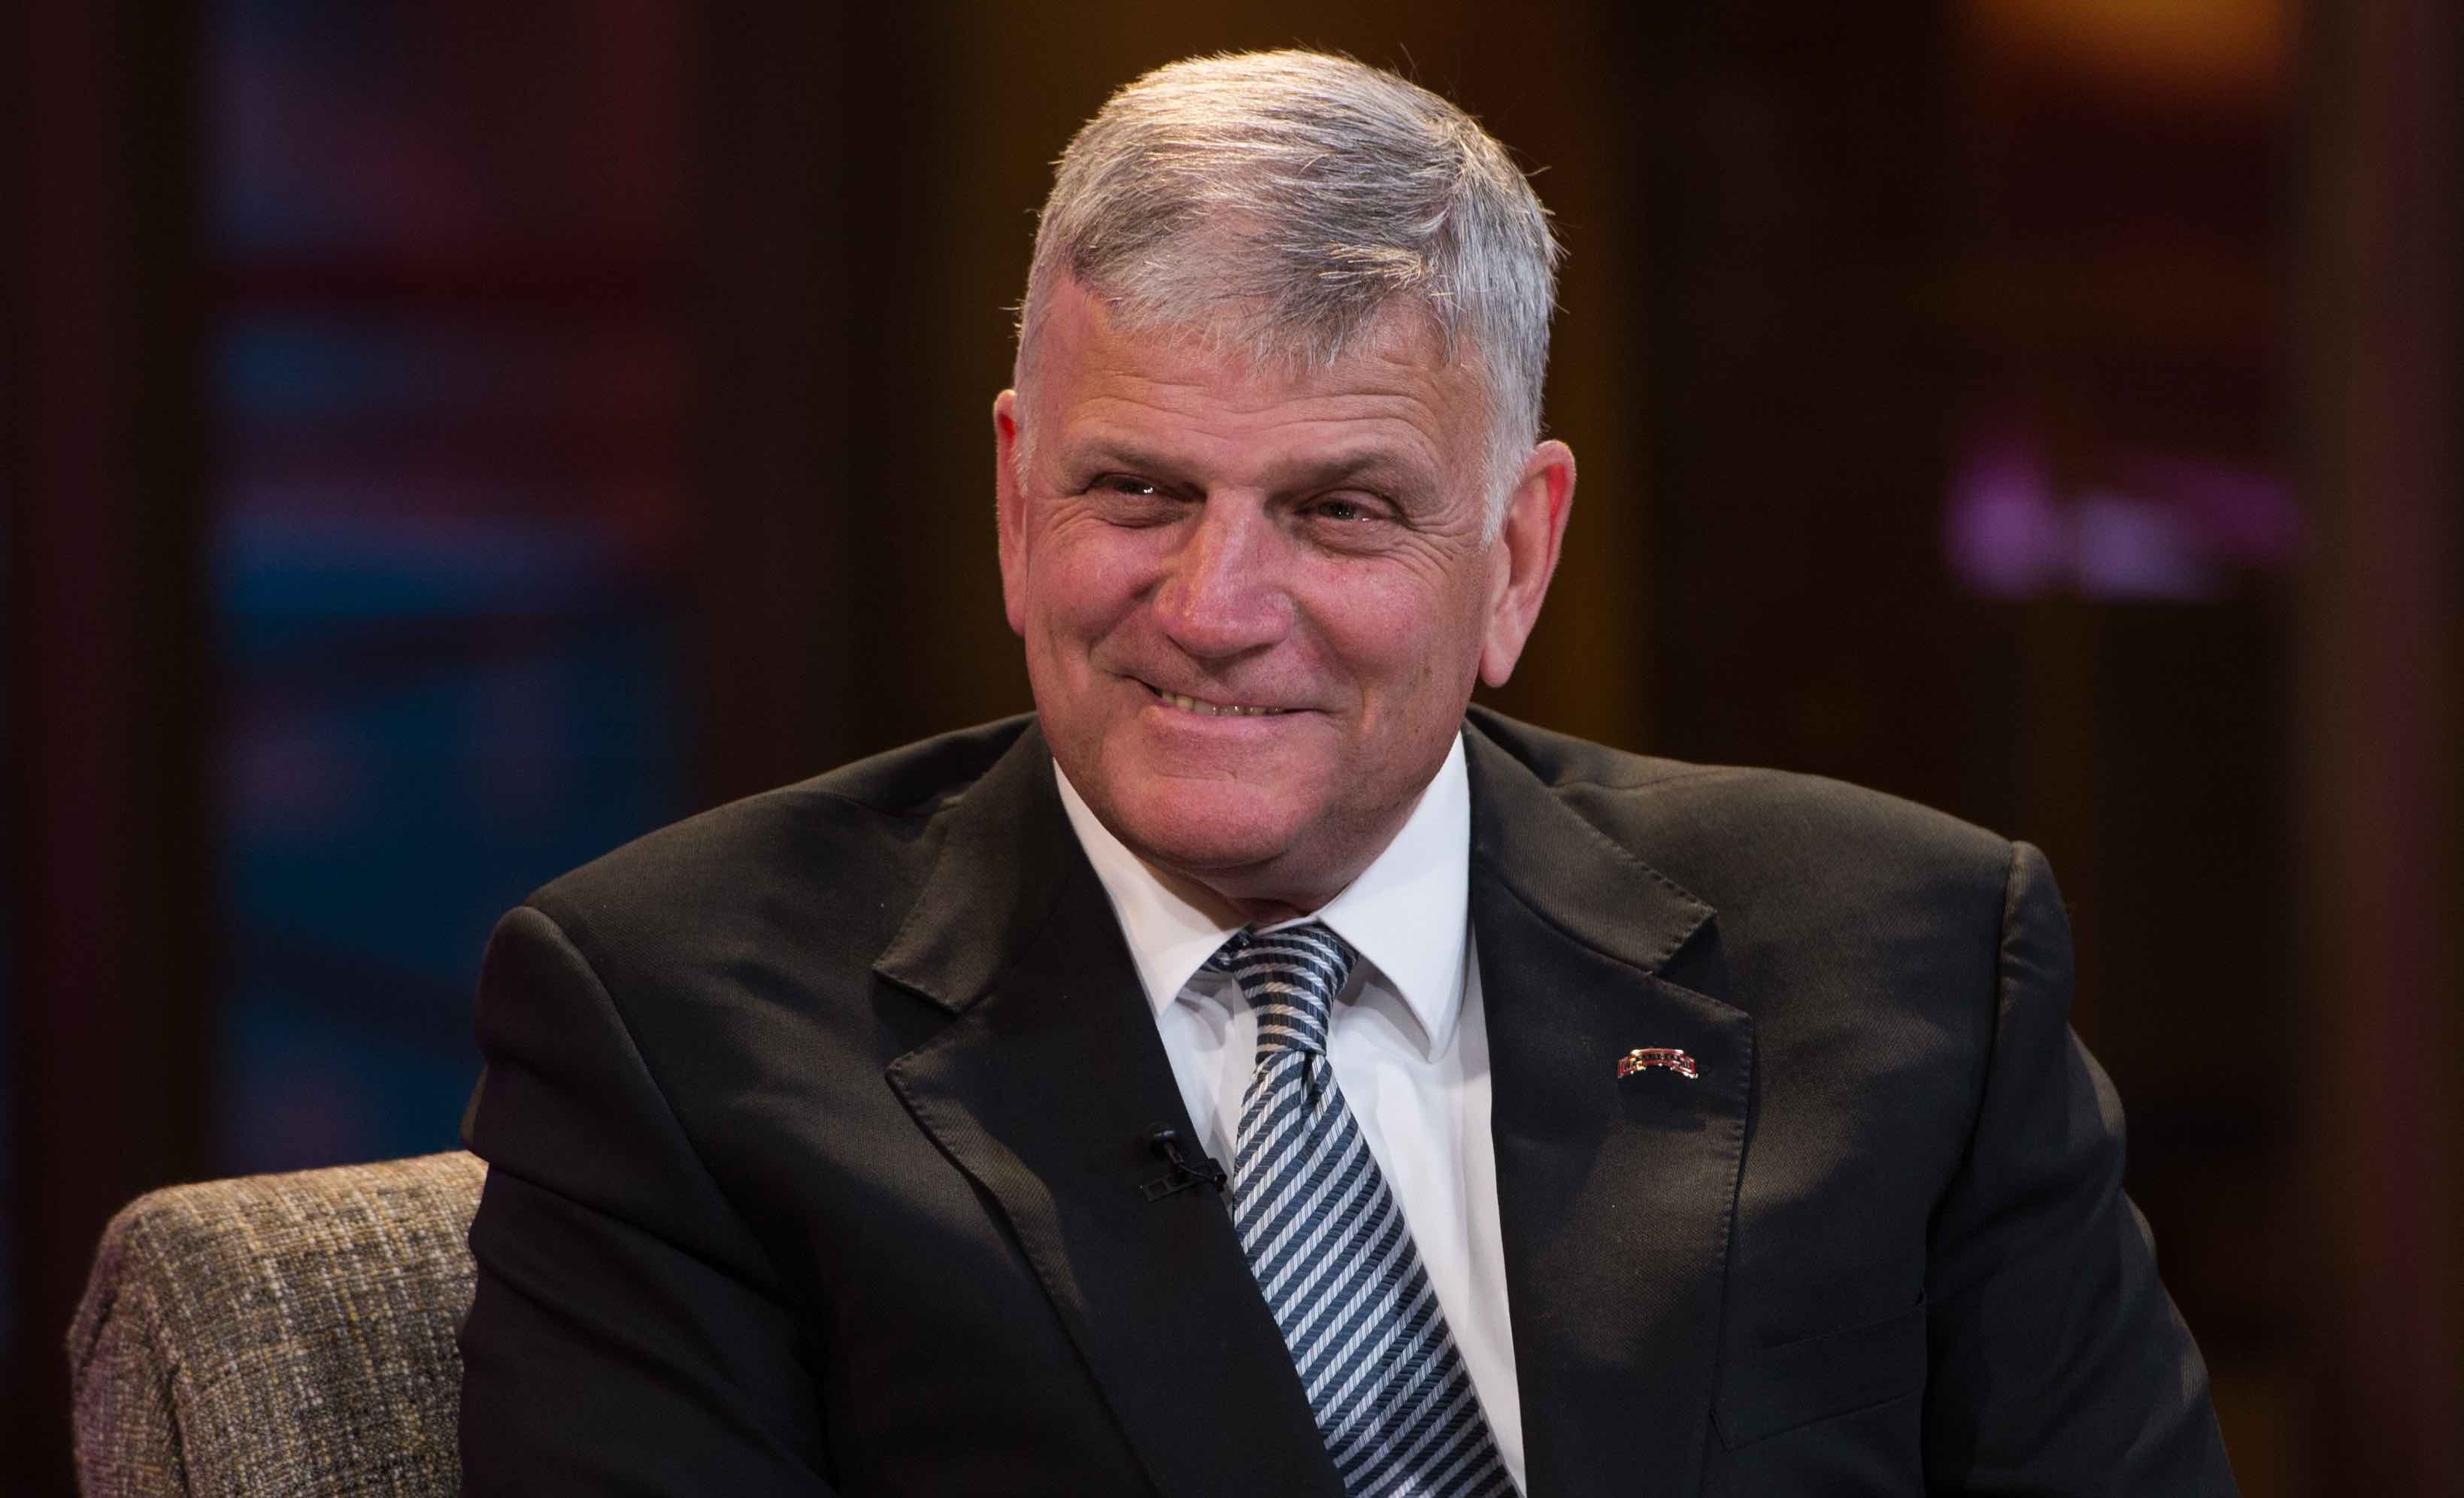 Franklin Graham wearing a black suit on a white shirt and a blue tie with a smile on his face